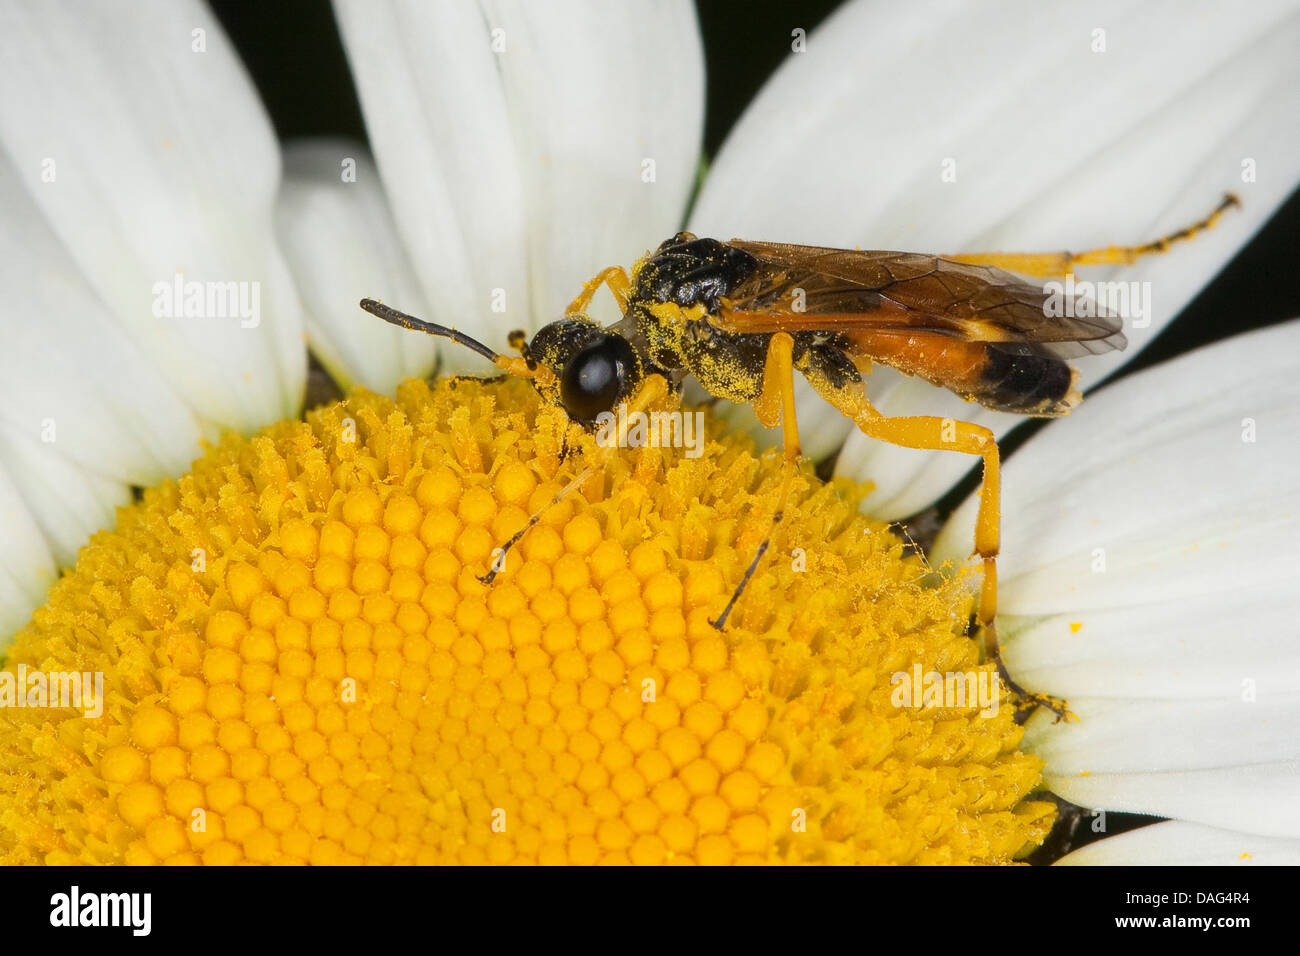 Sawfly, Saw-fly (Tenthredopsis spec,), on a daisy, covered with pollen, Germany Stock Photo